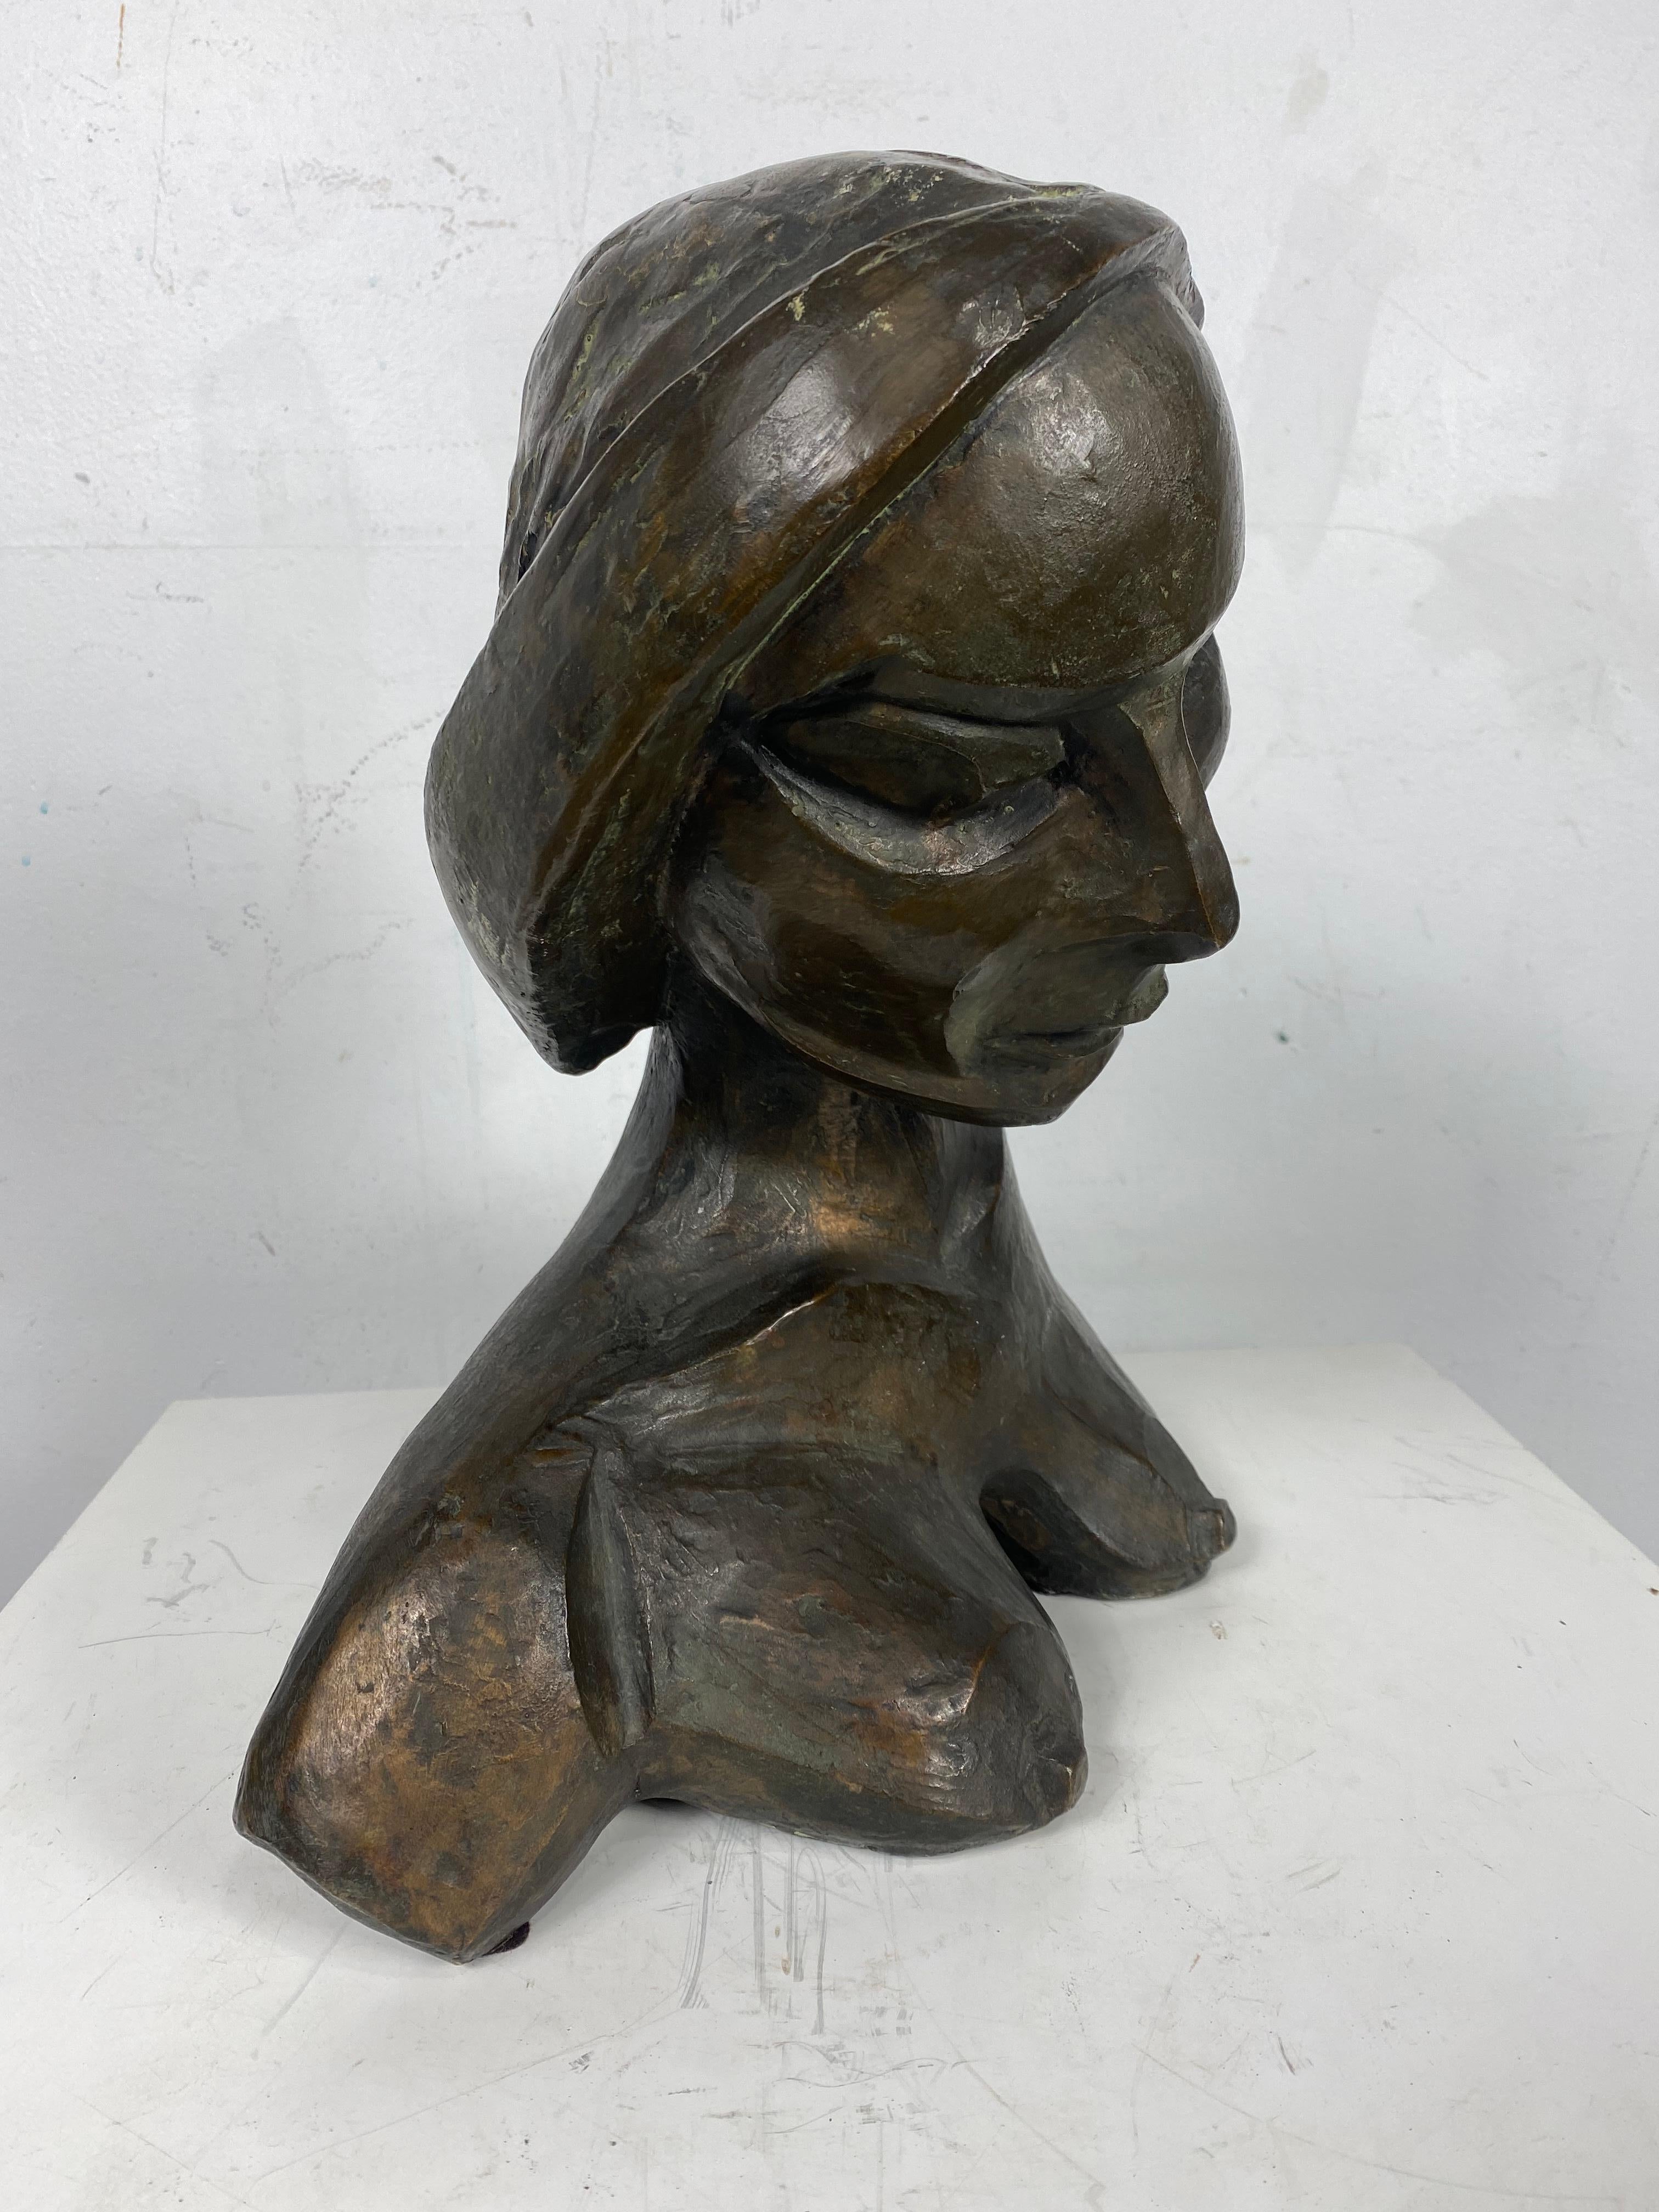 Stylized Art Deco,,W P A Bronze,,Woman bust, signed but wasn't able to identify? Powerful image! Extremely well executed.. I believe it is German..